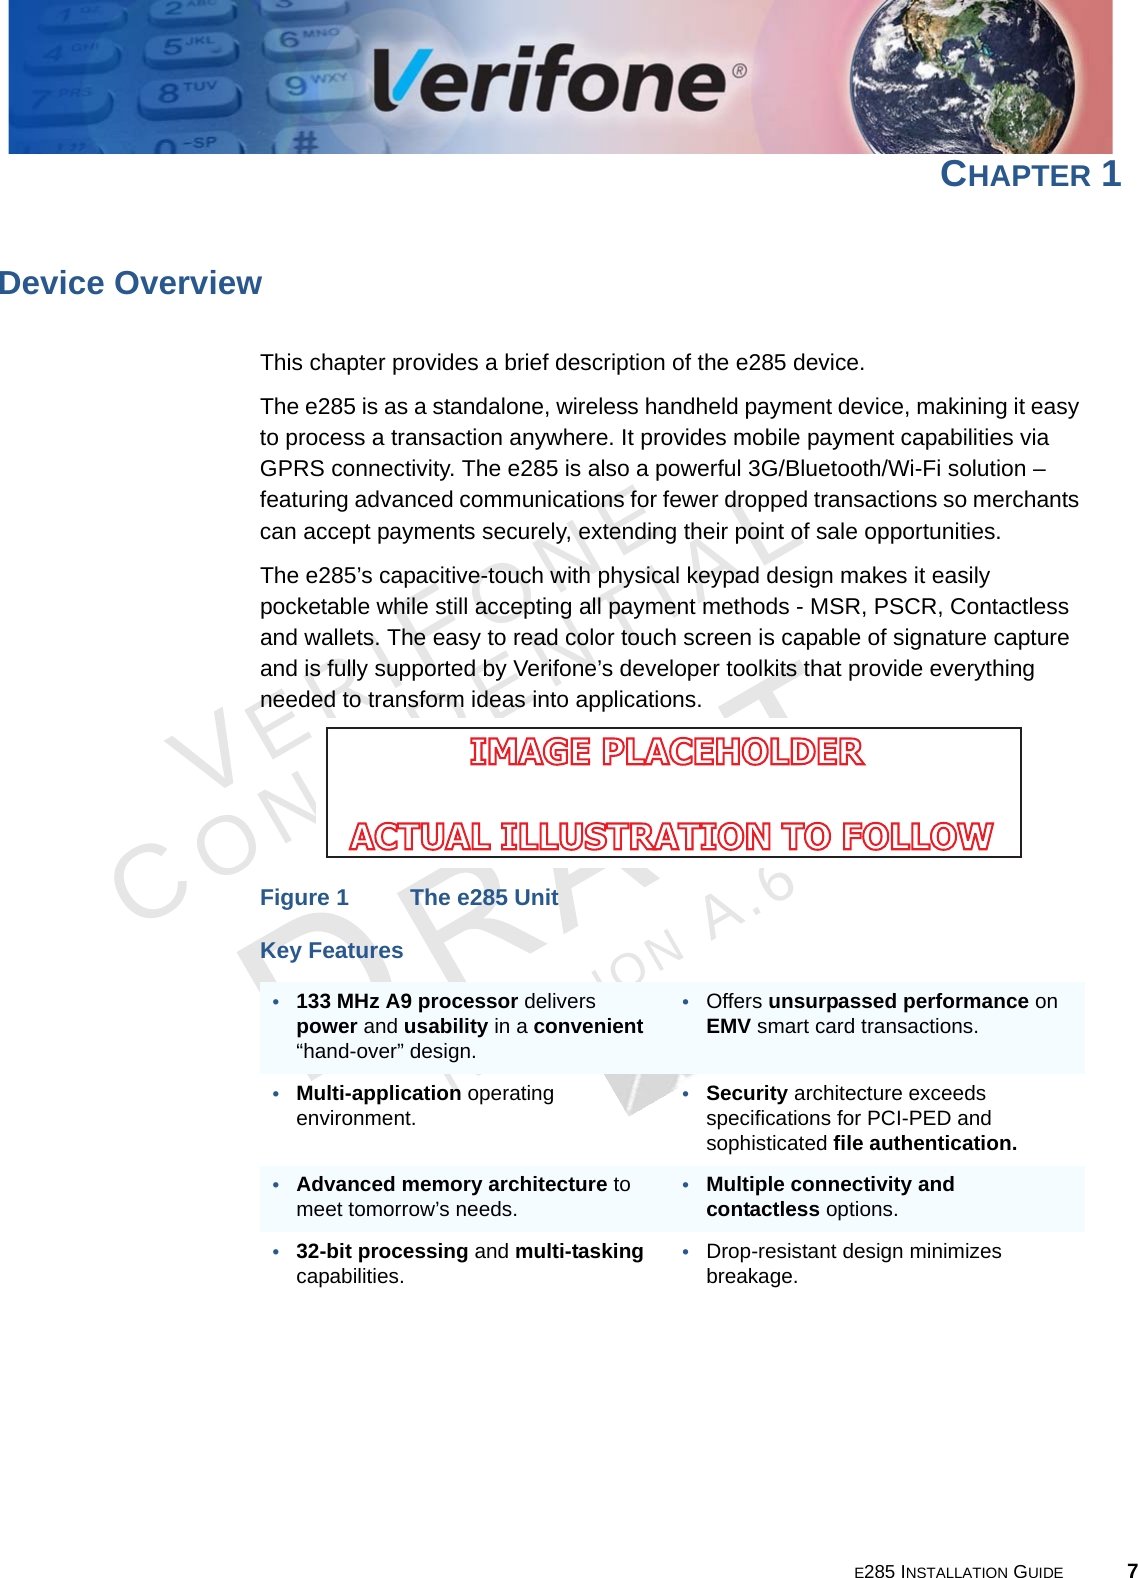 E285 INSTALLATION GUIDE 7VERIFONECONFIDENTIALREVISION A.6 CHAPTER 1Device OverviewThis chapter provides a brief description of the e285 device. The e285 is as a standalone, wireless handheld payment device, makining it easy to process a transaction anywhere. It provides mobile payment capabilities via GPRS connectivity. The e285 is also a powerful 3G/Bluetooth/Wi-Fi solution – featuring advanced communications for fewer dropped transactions so merchants can accept payments securely, extending their point of sale opportunities.The e285’s capacitive-touch with physical keypad design makes it easily pocketable while still accepting all payment methods - MSR, PSCR, Contactless and wallets. The easy to read color touch screen is capable of signature capture and is fully supported by Verifone’s developer toolkits that provide everything needed to transform ideas into applications.Figure 1 The e285 UnitKey Features•133 MHz A9 processor delivers power and usability in a convenient “hand-over” design.•Offers unsurpassed performance on EMV smart card transactions.•Multi-application operating environment.•Security architecture exceeds specifications for PCI-PED and sophisticated file authentication.•Advanced memory architecture to meet tomorrow’s needs.•Multiple connectivity and contactless options.•32-bit processing and multi-tasking capabilities.•Drop-resistant design minimizes breakage.IMAGE PLACEHOLDER ACTUAL ILLUSTRATION TO FOLLOW